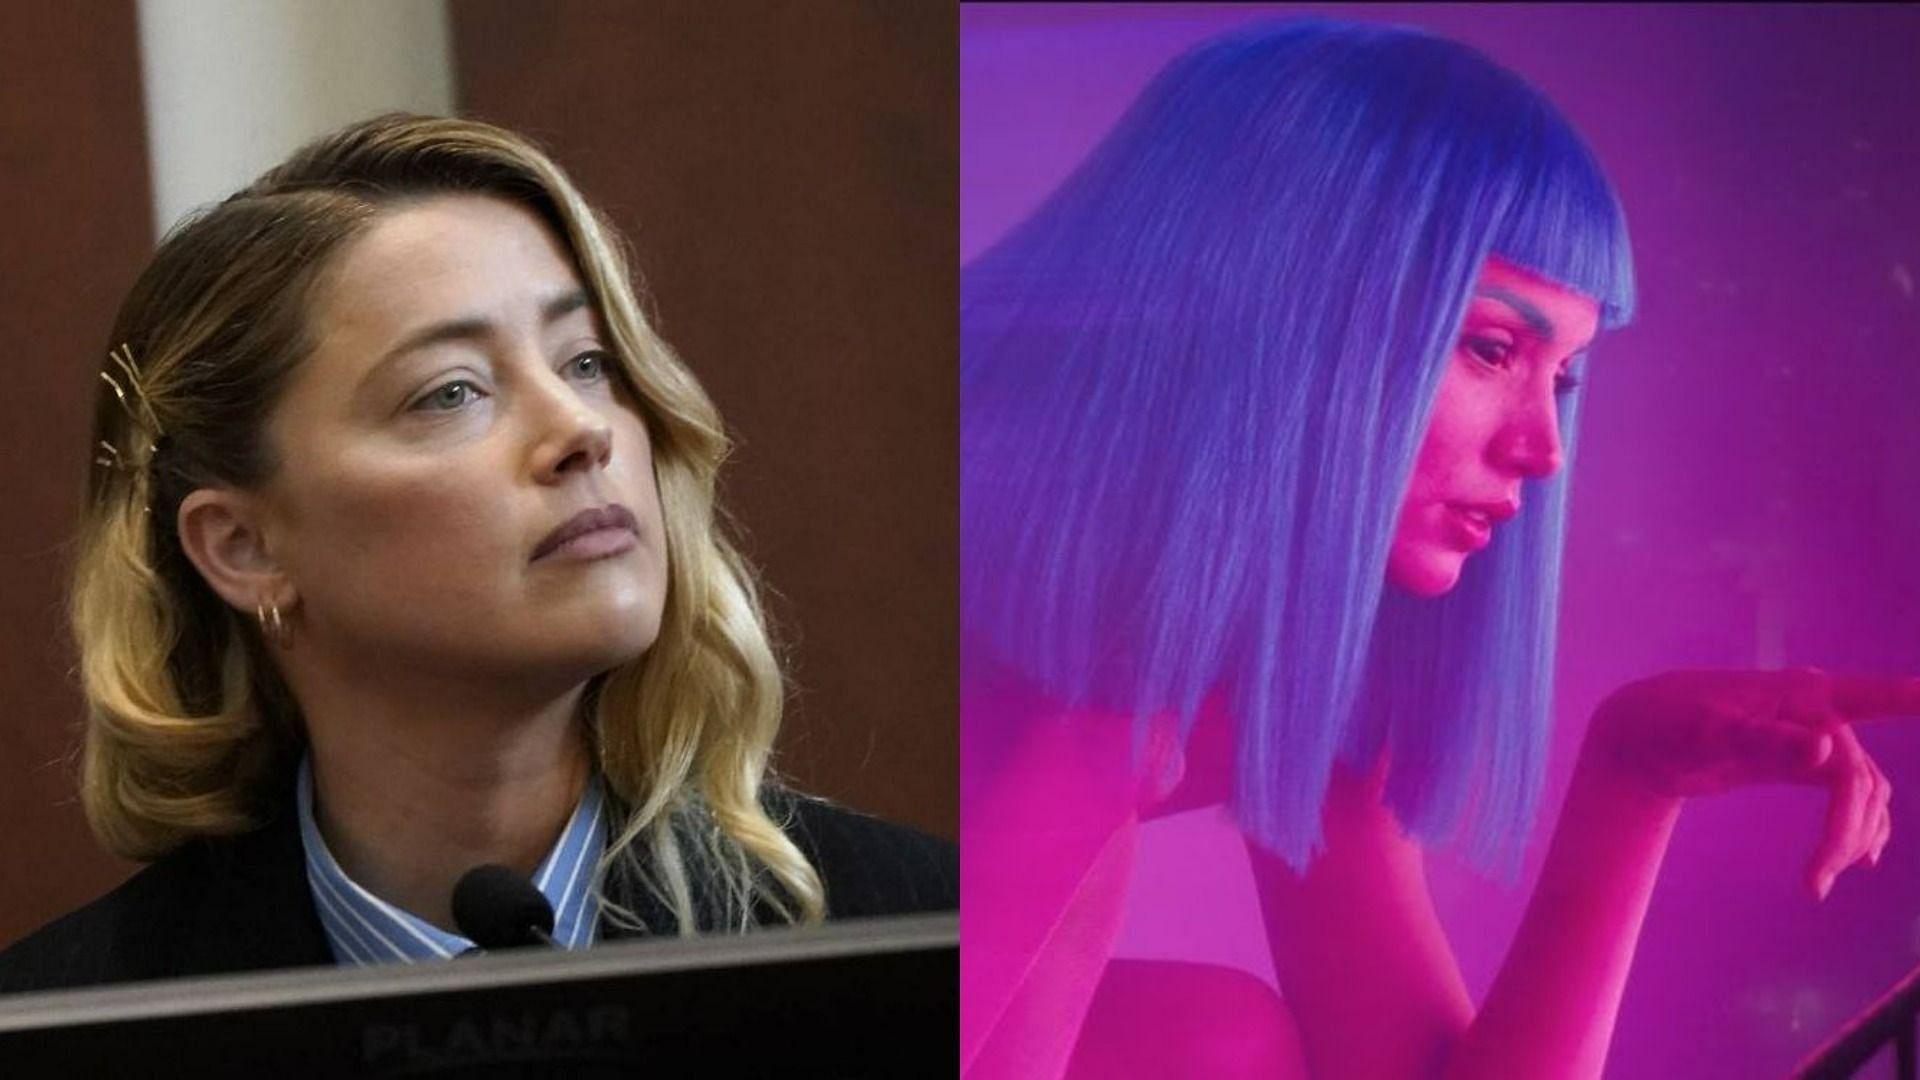 Blade Runner 2049: The Role of Blue Hair in the Dystopian World - wide 3